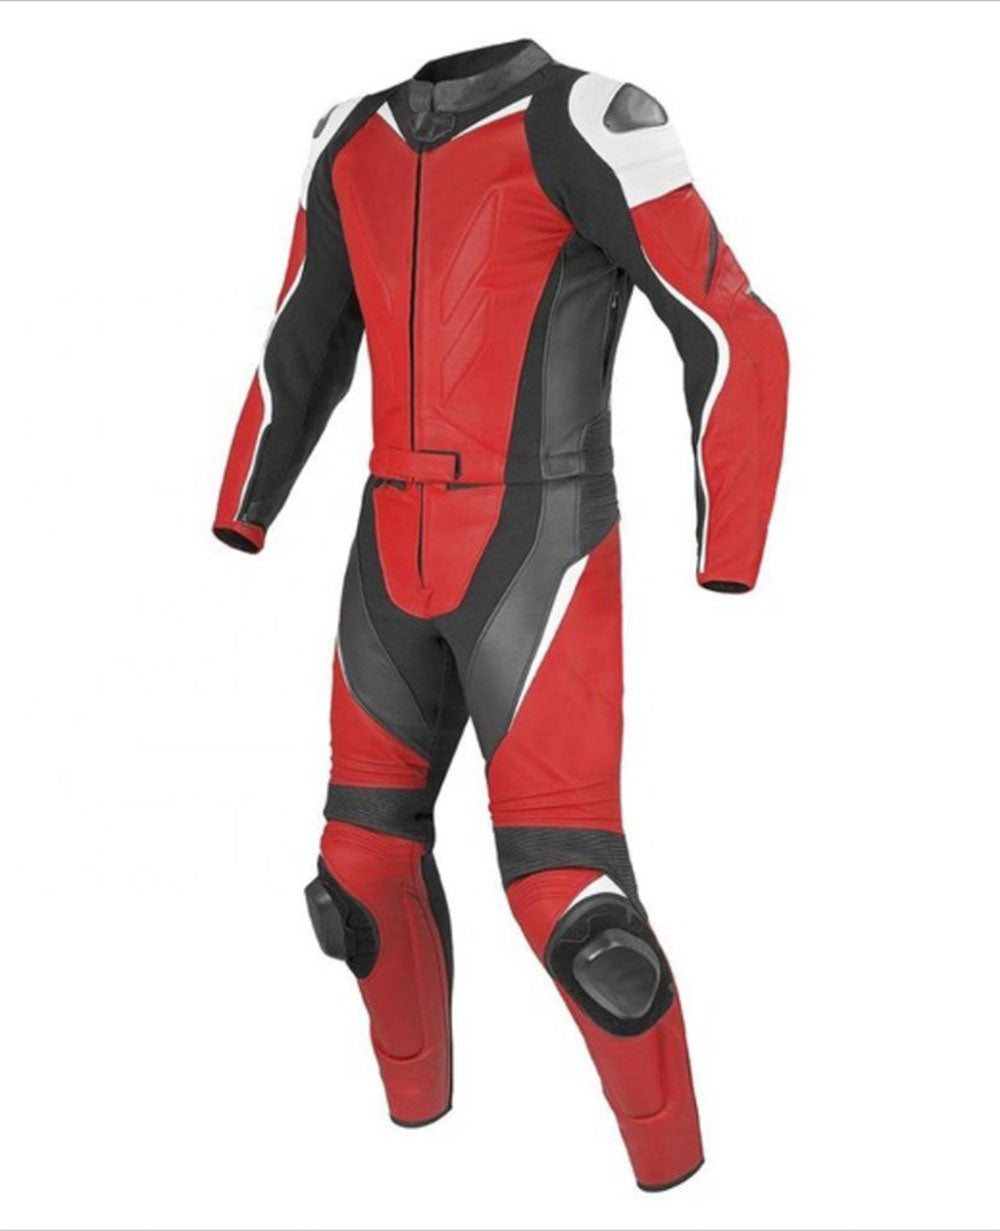 UG-0110 CUSTOMIZED DESIGN MOTORCYCLE LEATHER RACING CE PROTECTED 2 PIECE SUIT FRONT